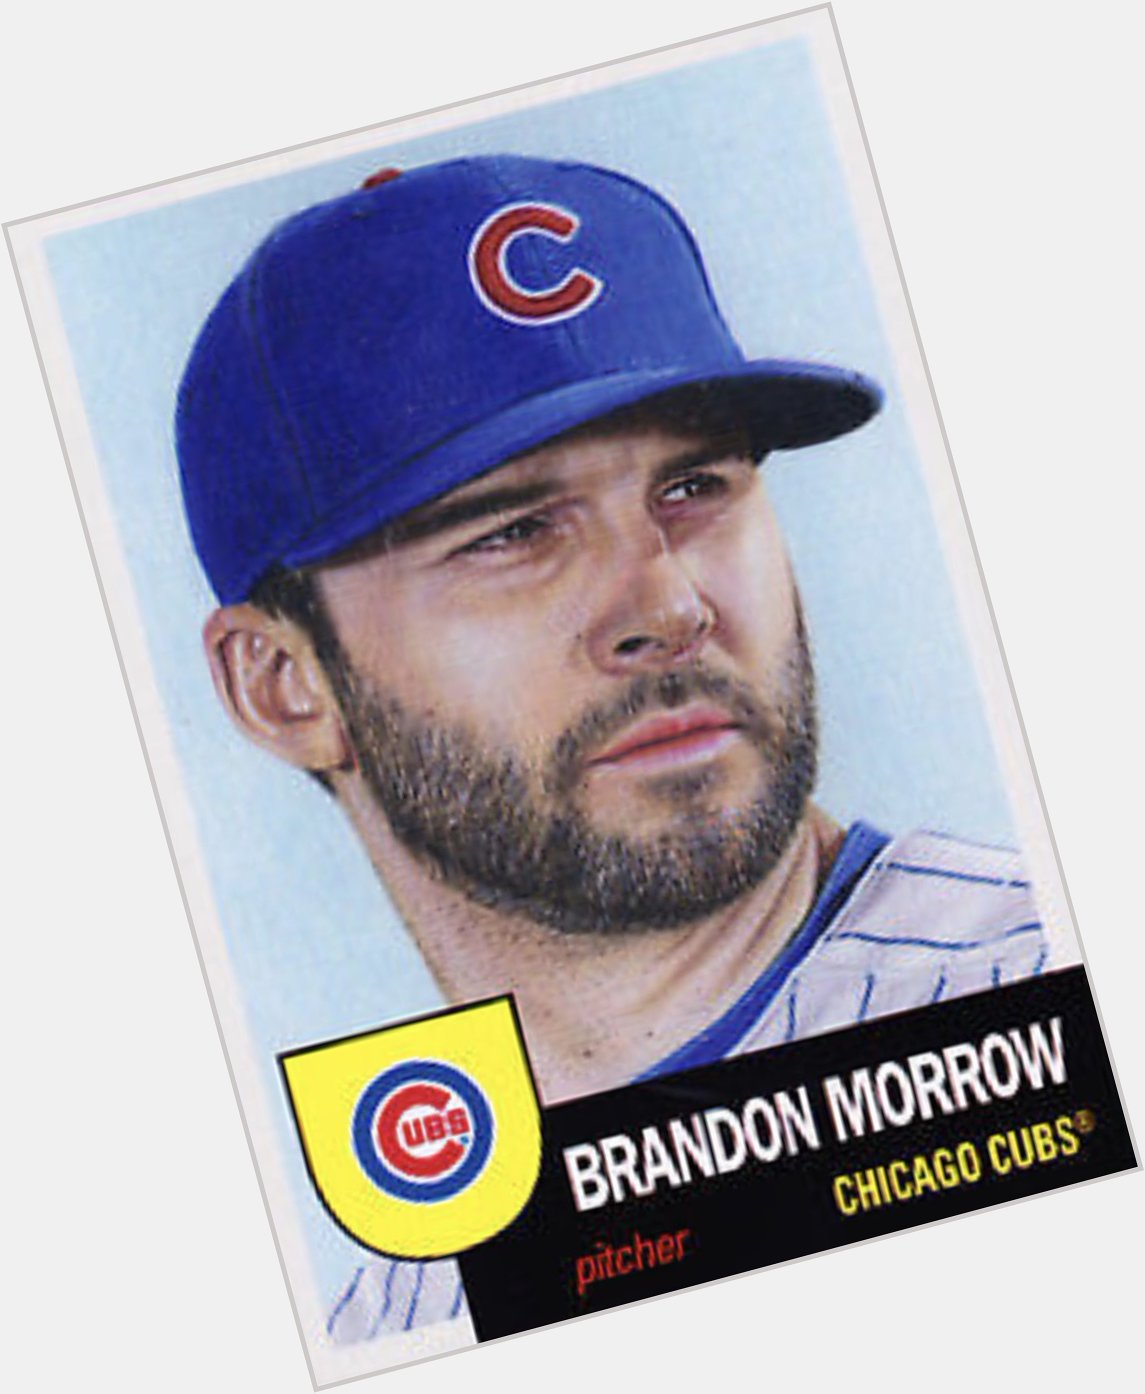 Happy Birthday to Cubs closer Brandon Morrow, who pitched in two games with the 2014 